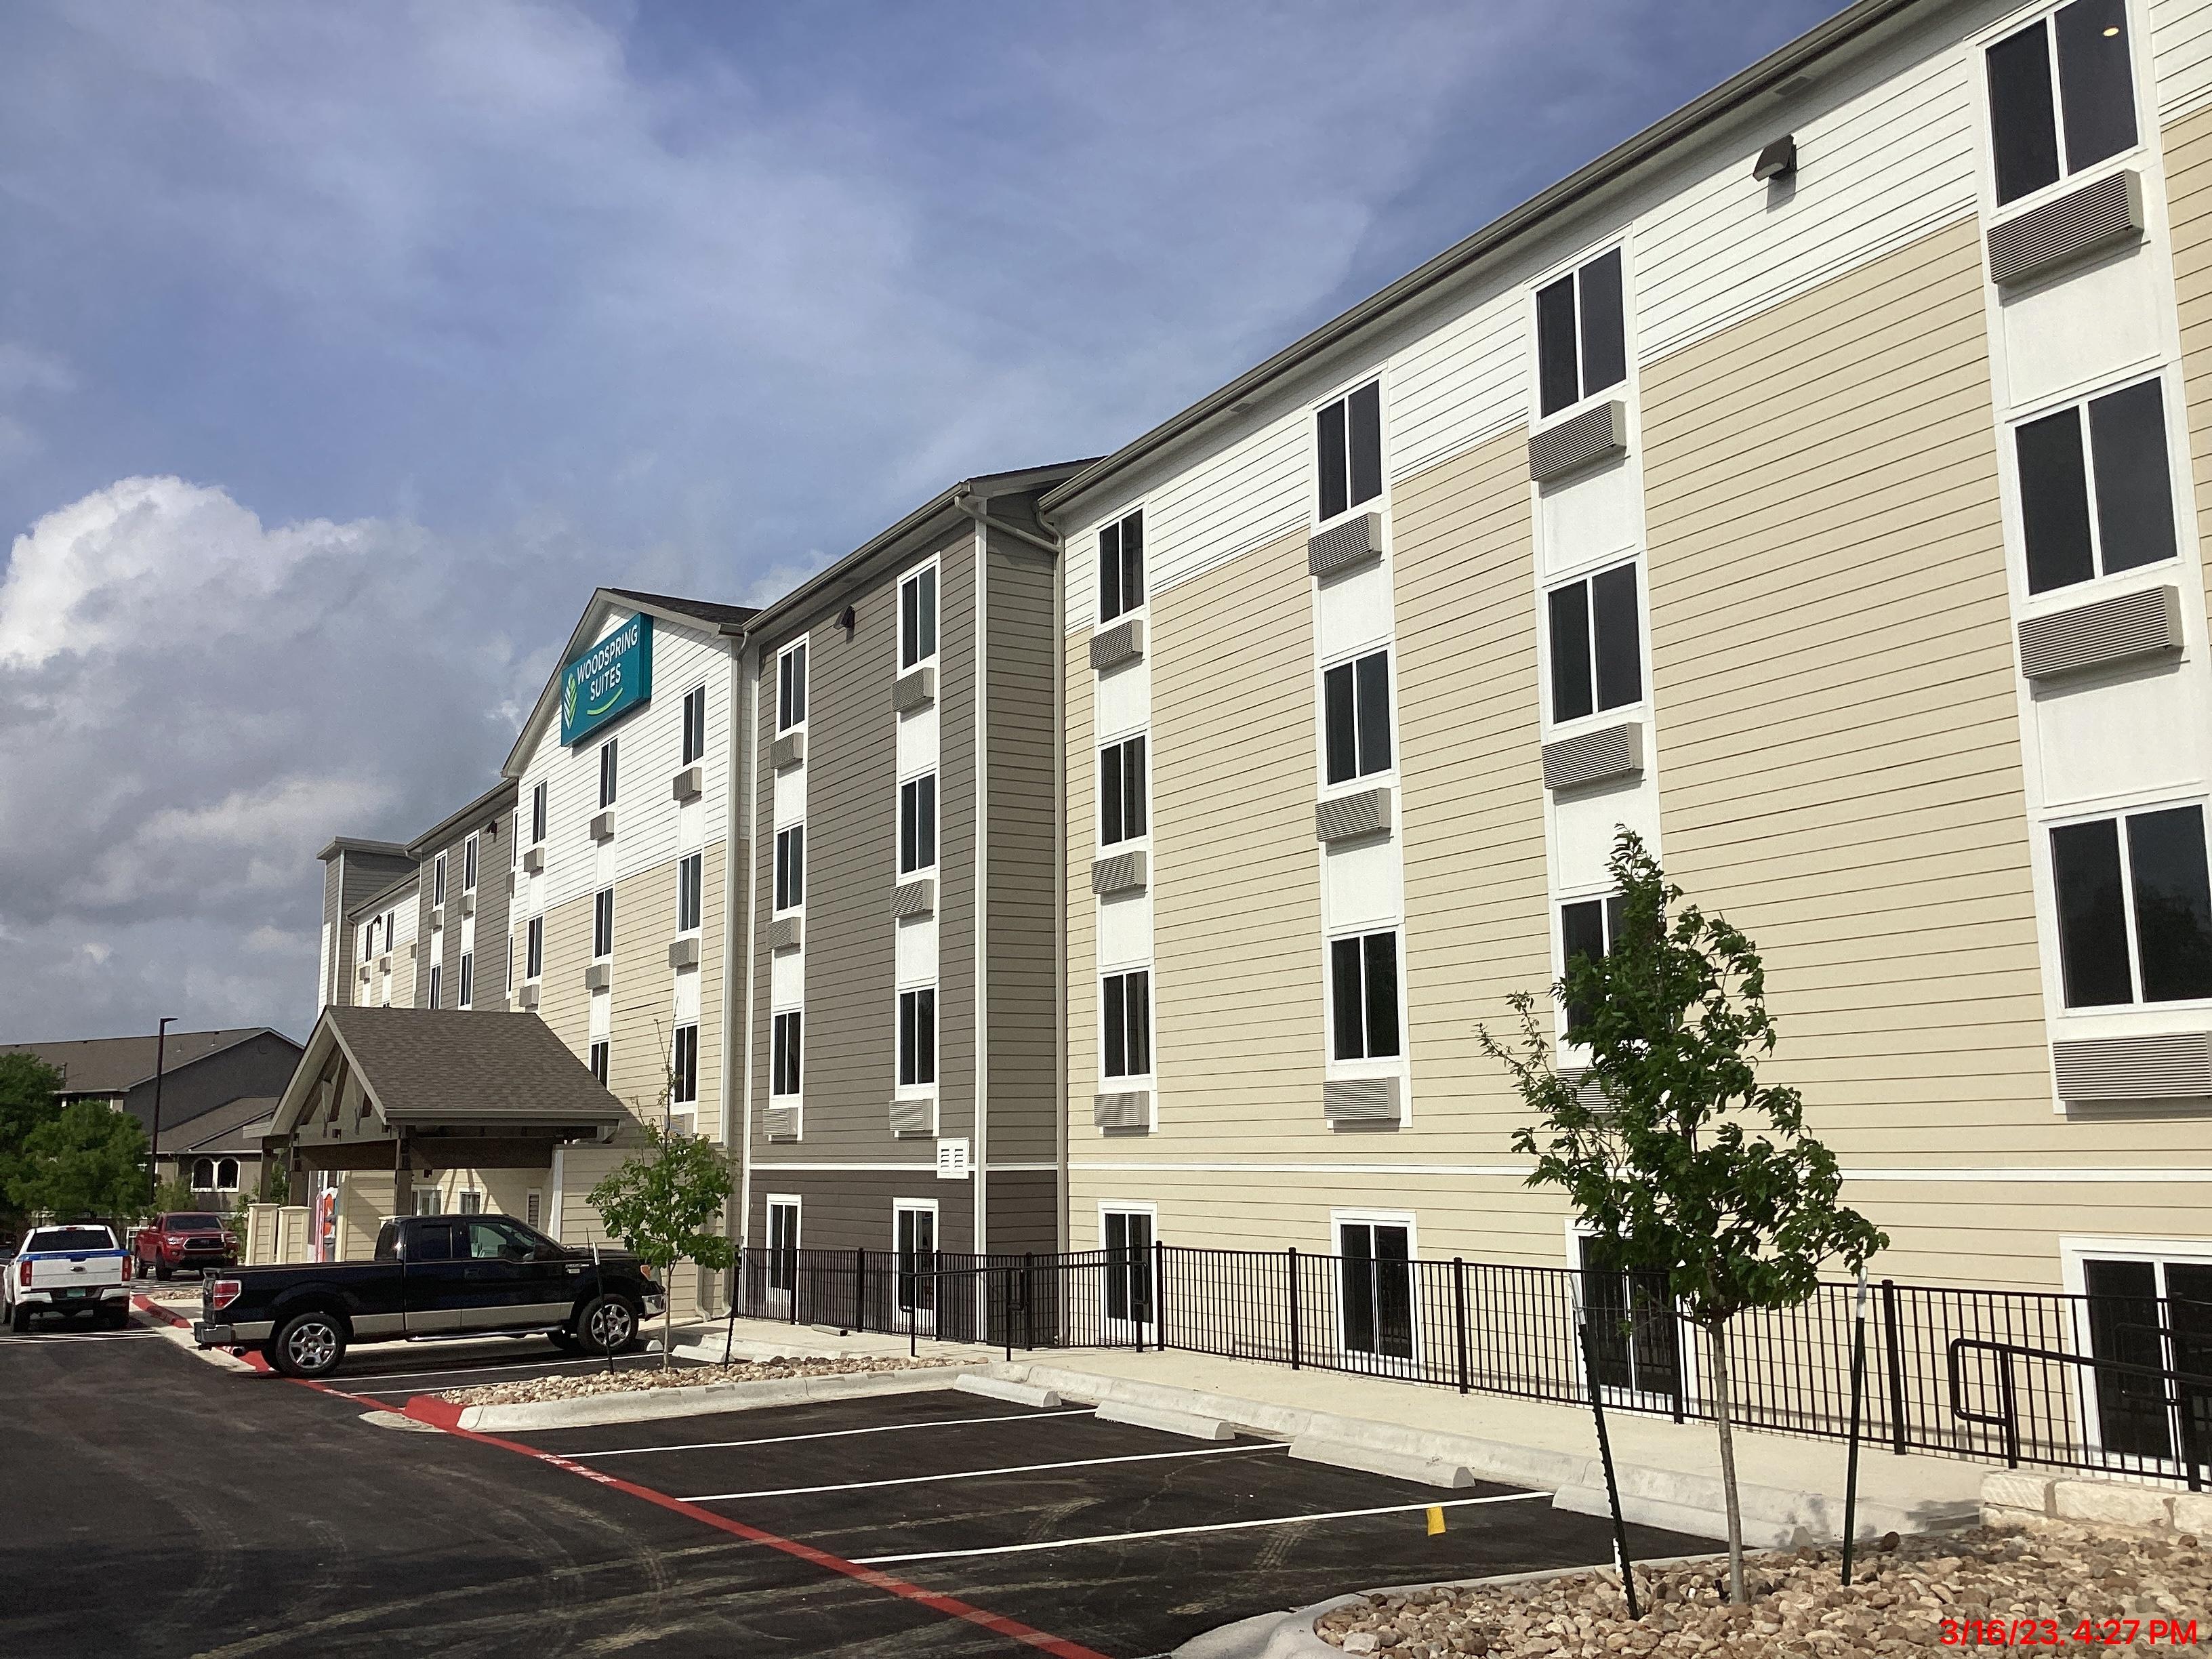 Exterior view of the front to the WoodSpring Suites hotel in Austin, TX.